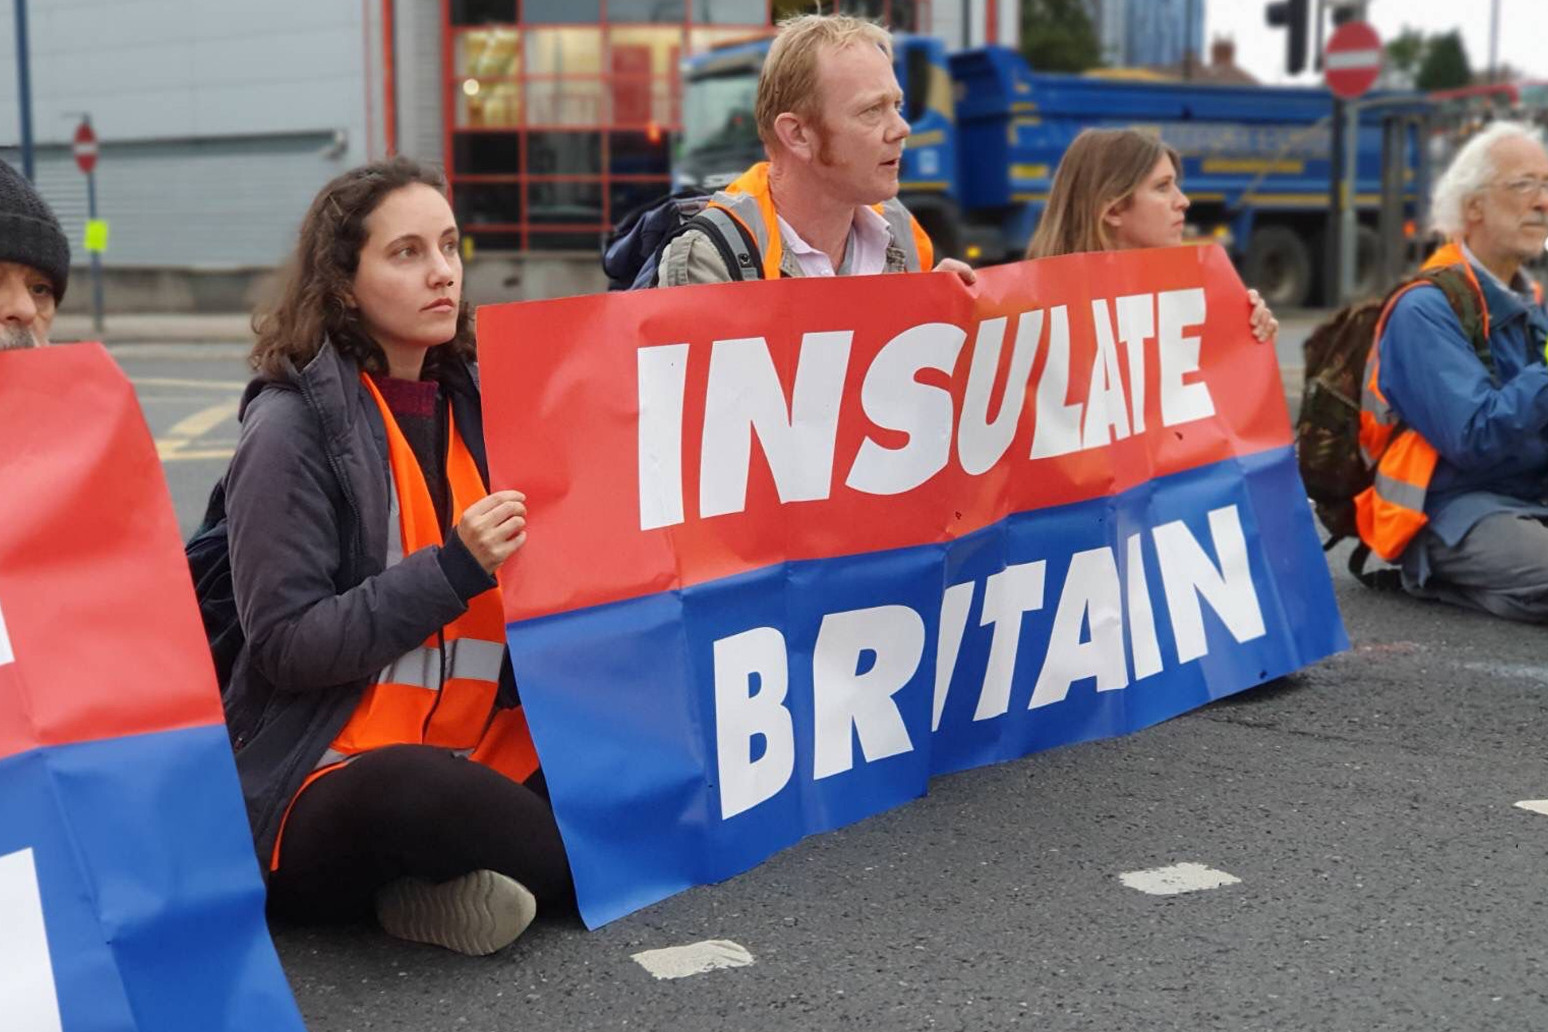 Insulate Britain protesters squirted with ink as they block roads 